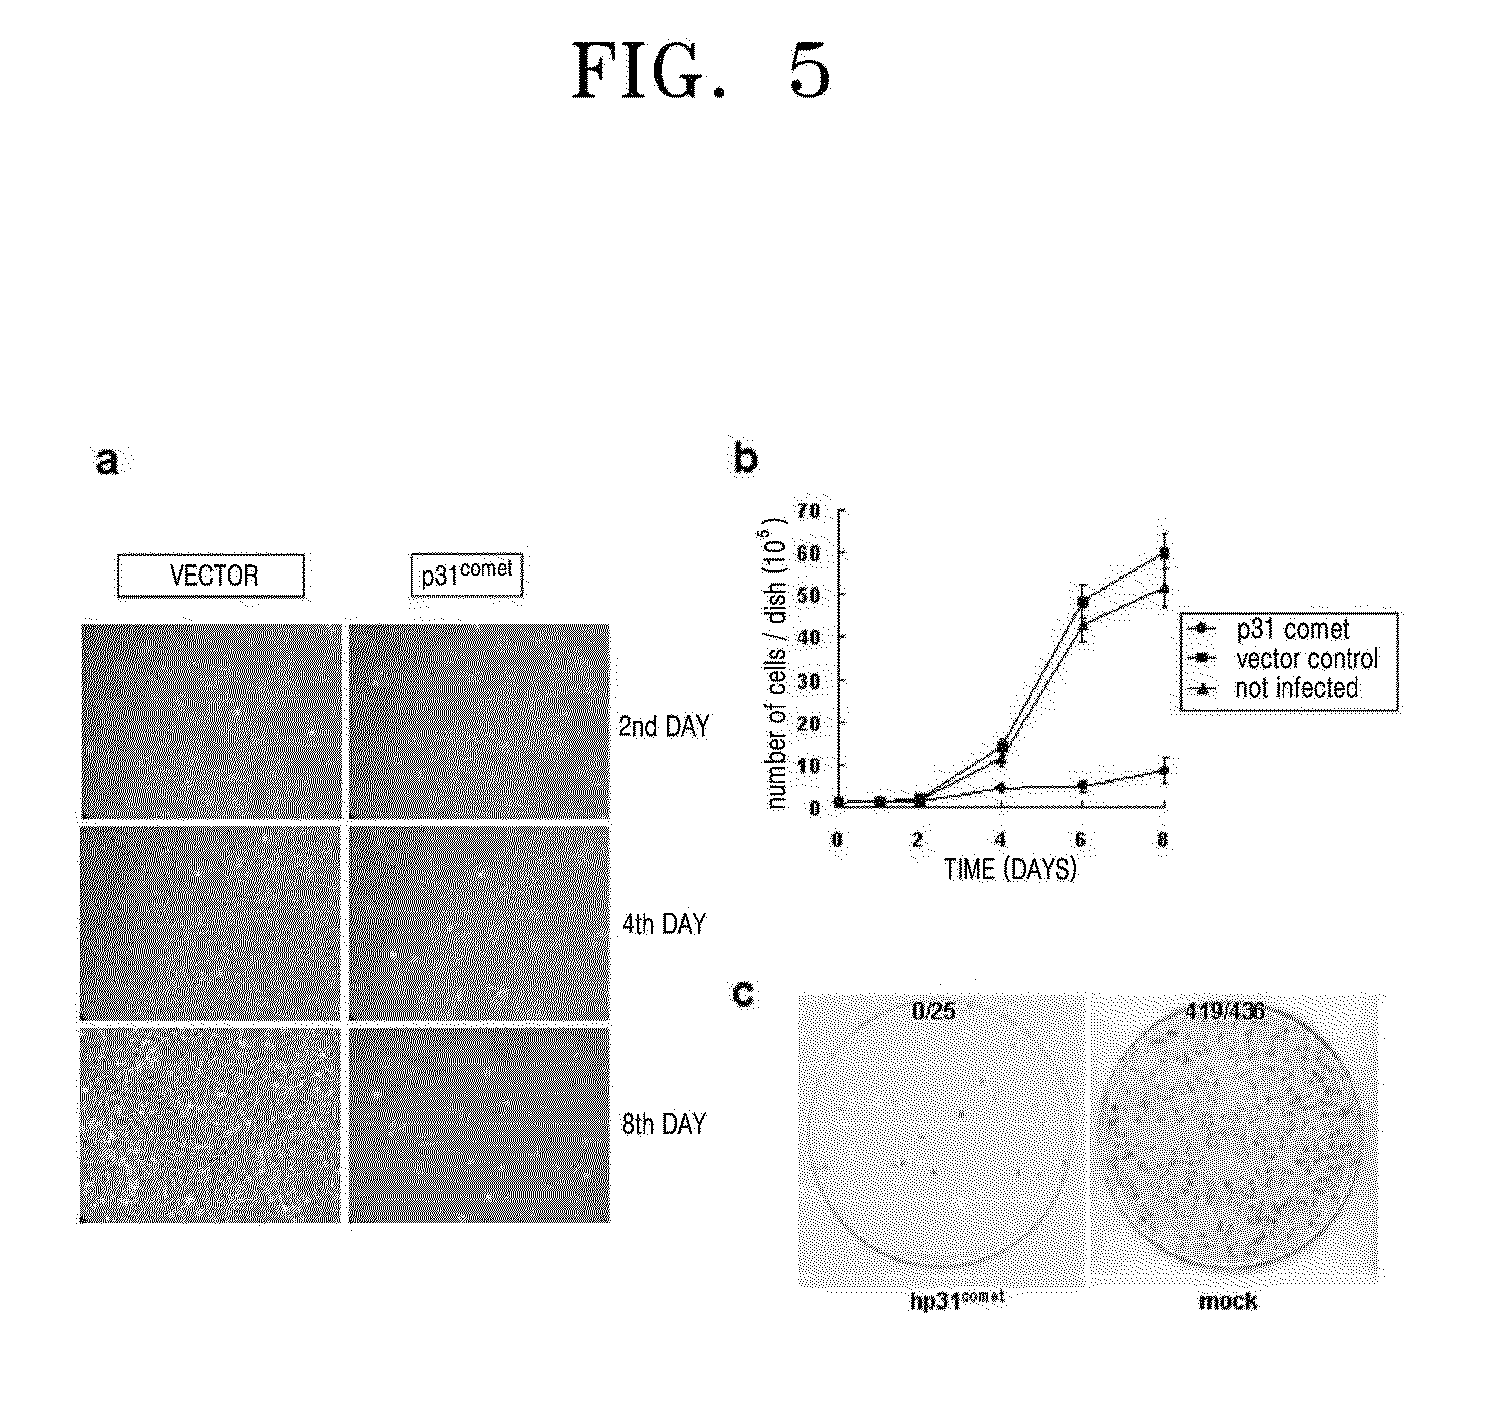 PHARMACEUTICAL COMPOSITION FOR TREATING MALIGNANT TUMORS CONTAINING HUMAN p31 GENES